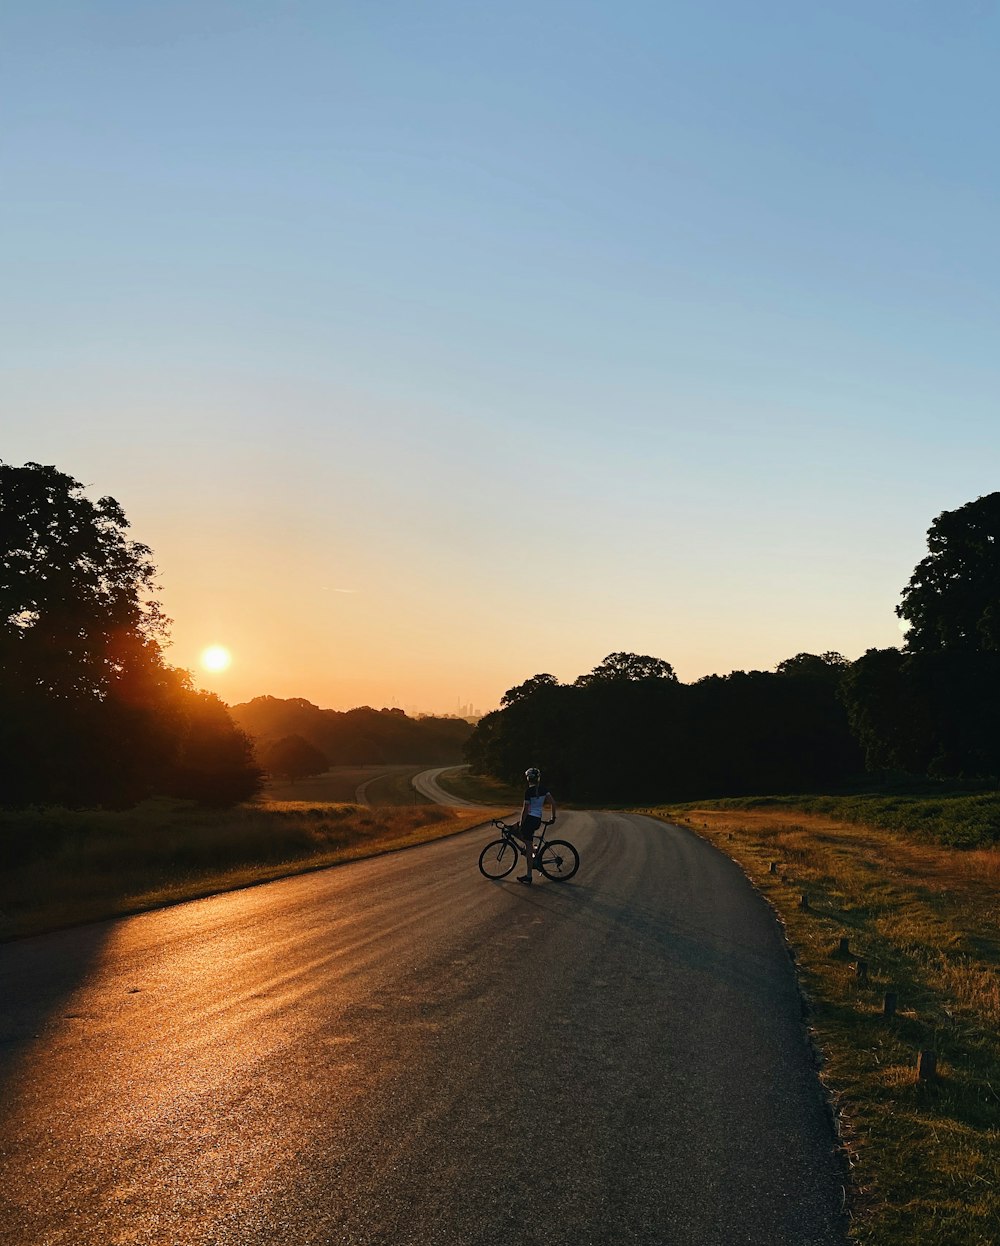 a person riding a bicycle on a road with trees and the sun setting